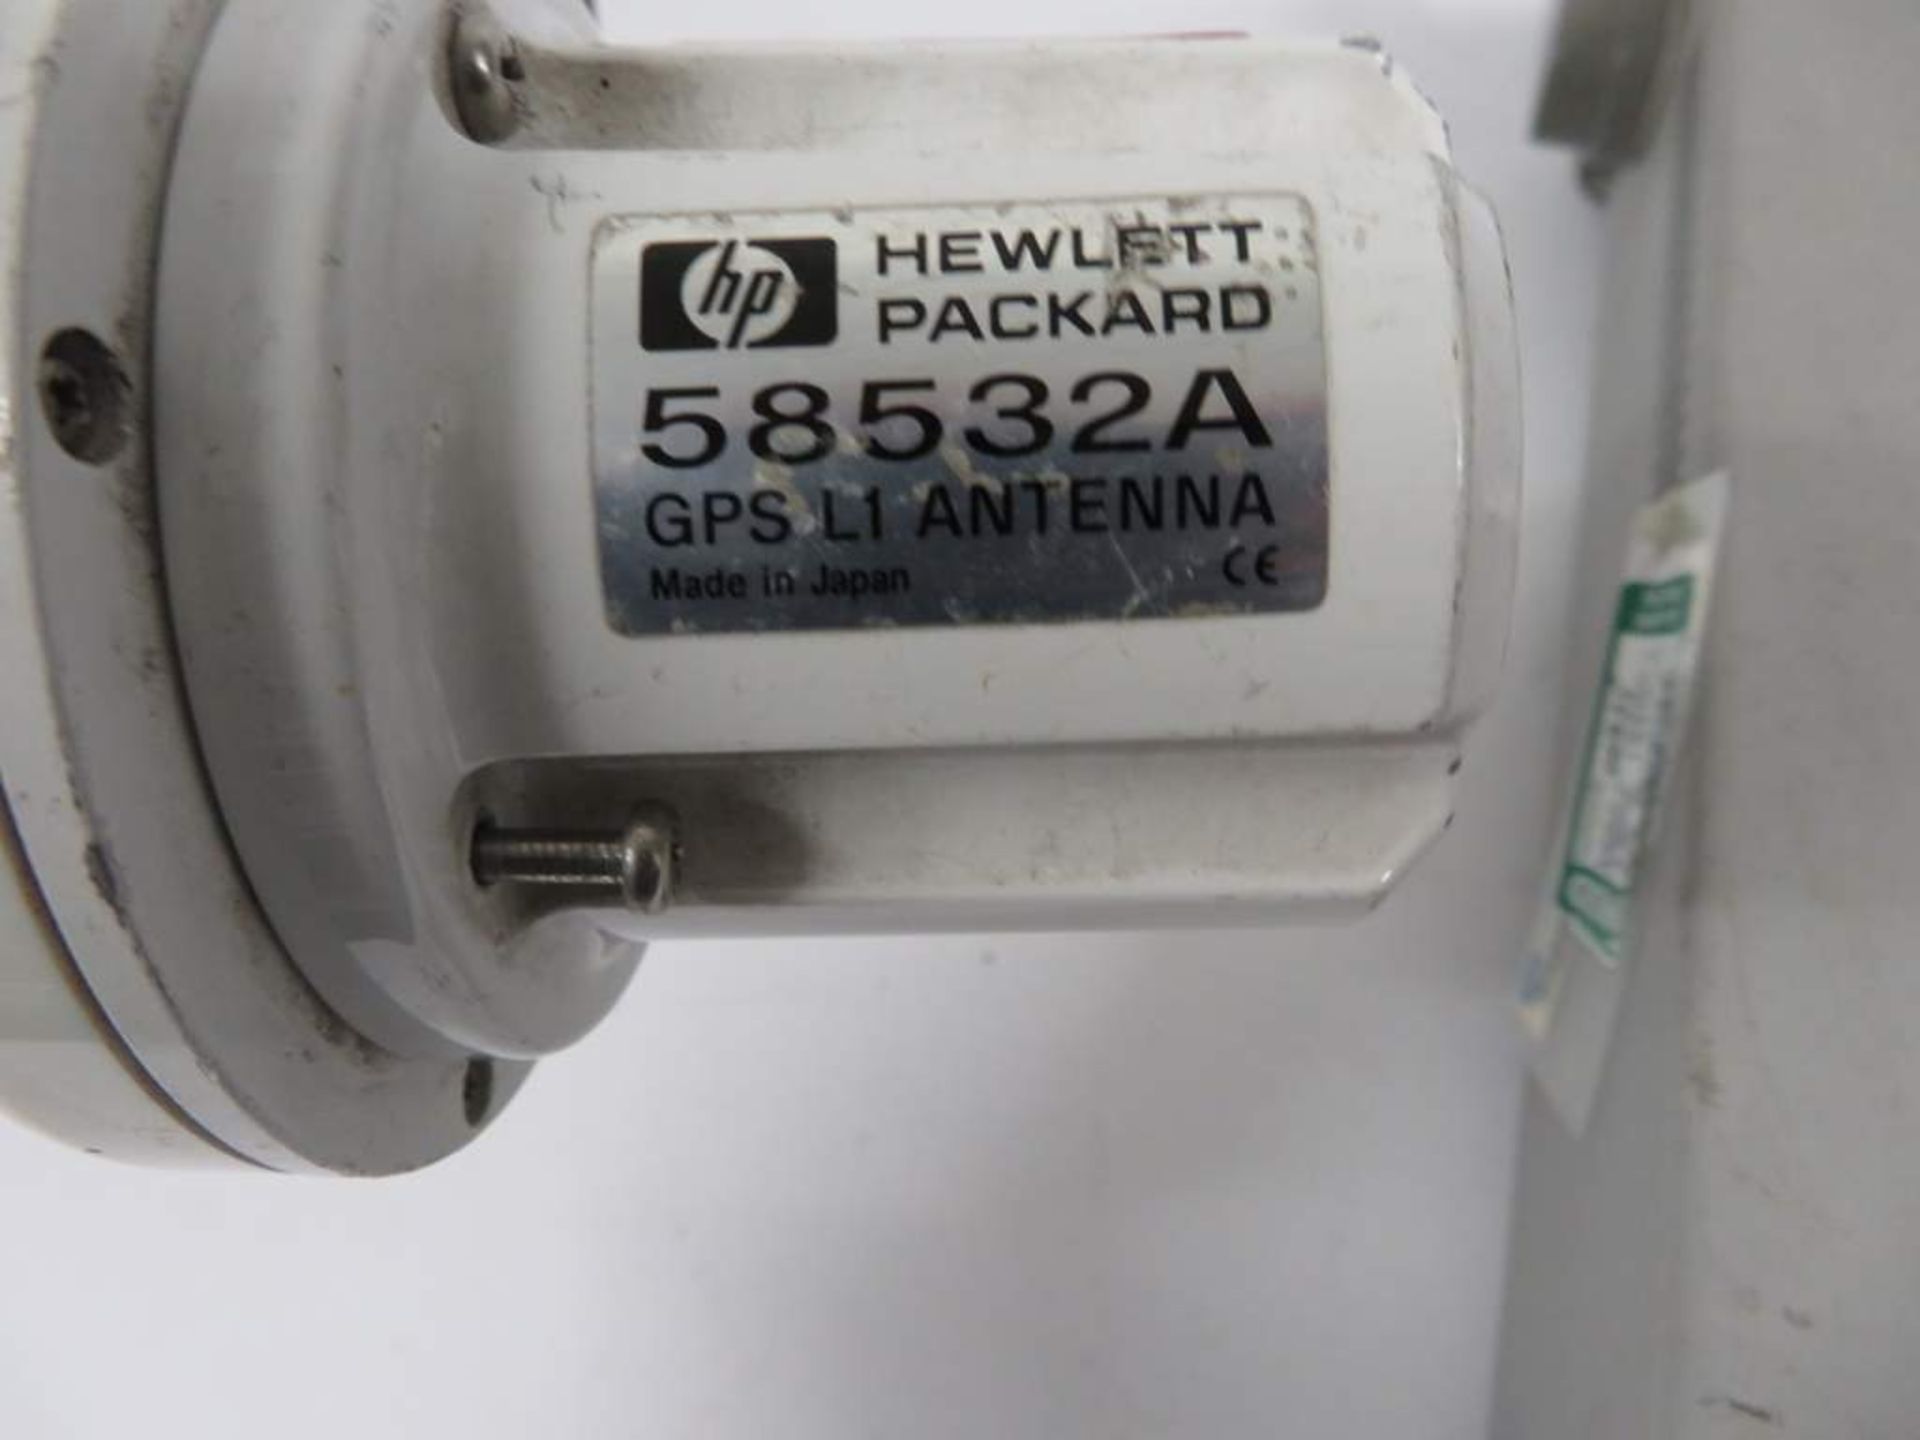 Hewlett Packard 58532A GPS L1 Antenna & HP 58503B GPS time and frequency reference receiver - Bild 5 aus 5